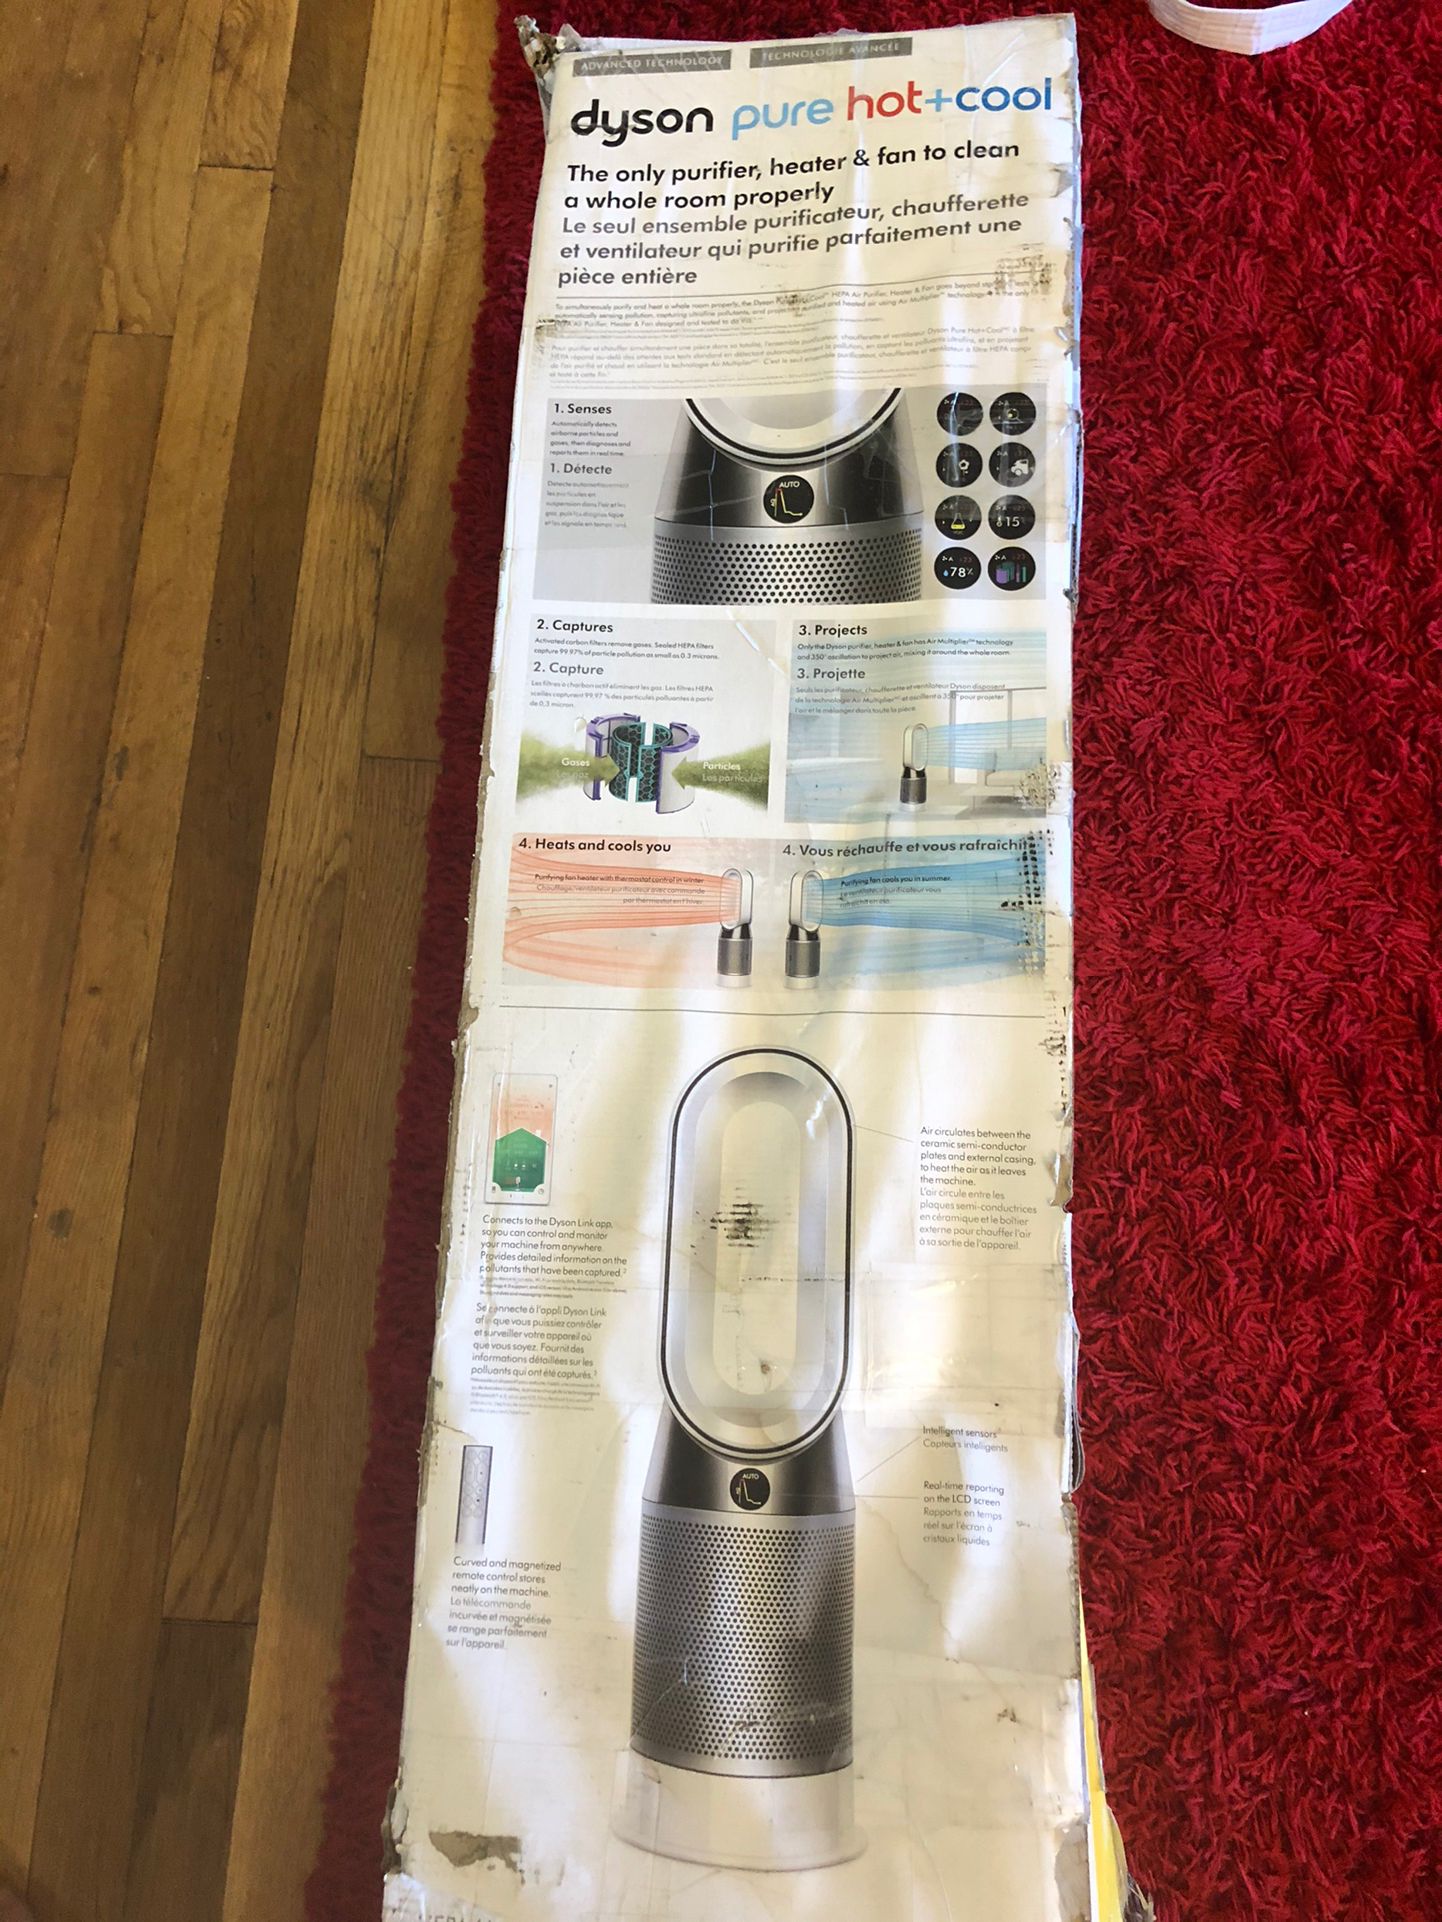 Dyson Pure Hot+Cool Link HEPA Air purifier Fan and Heater - HP04 - Grey / Silver.   In used - good condition . Working perfect   Has original dyson 2 